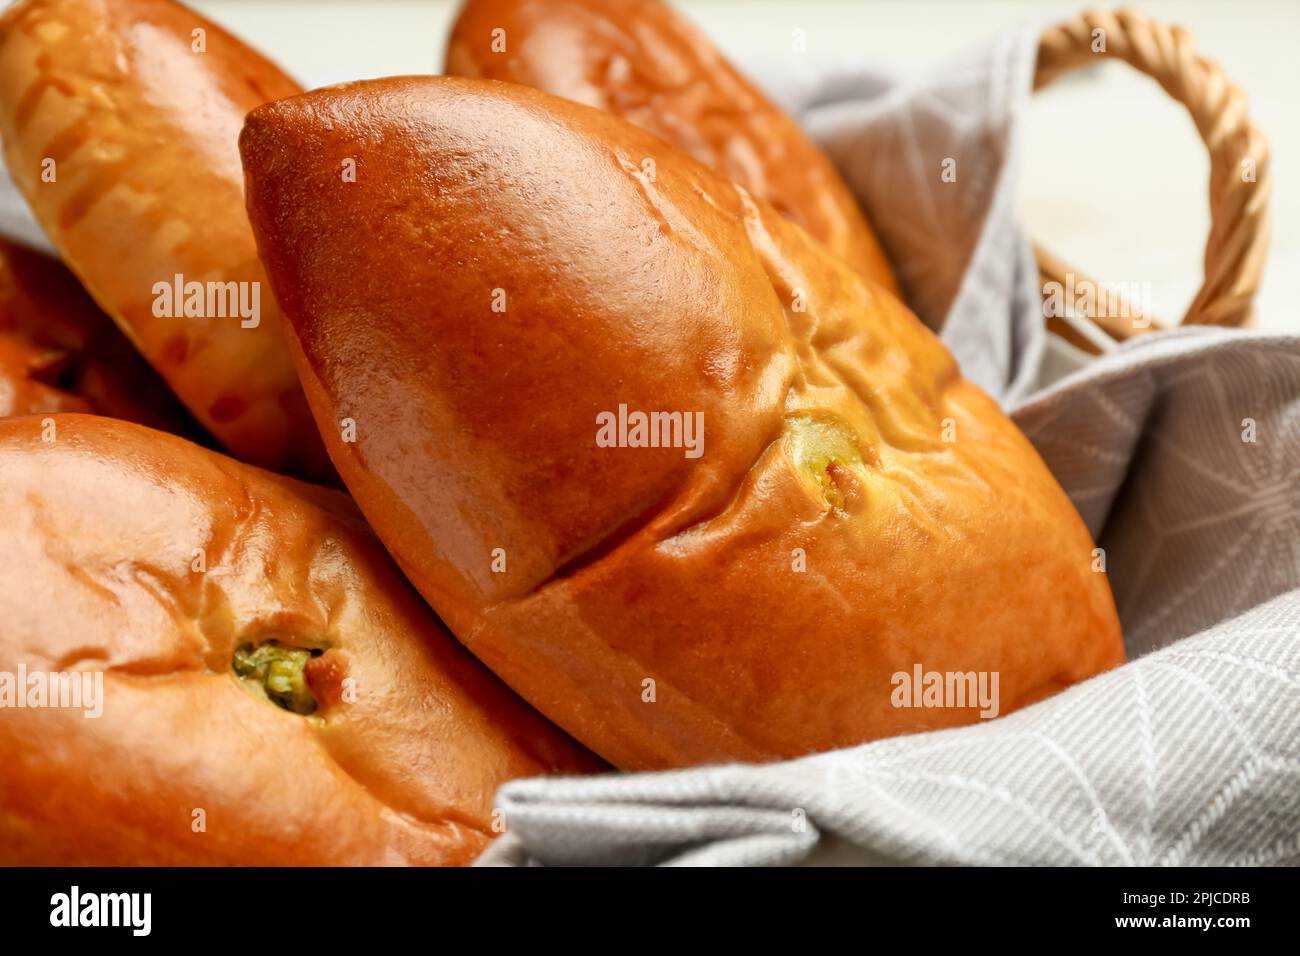 Basket with delicious baked patties, closeup view Stock Photo